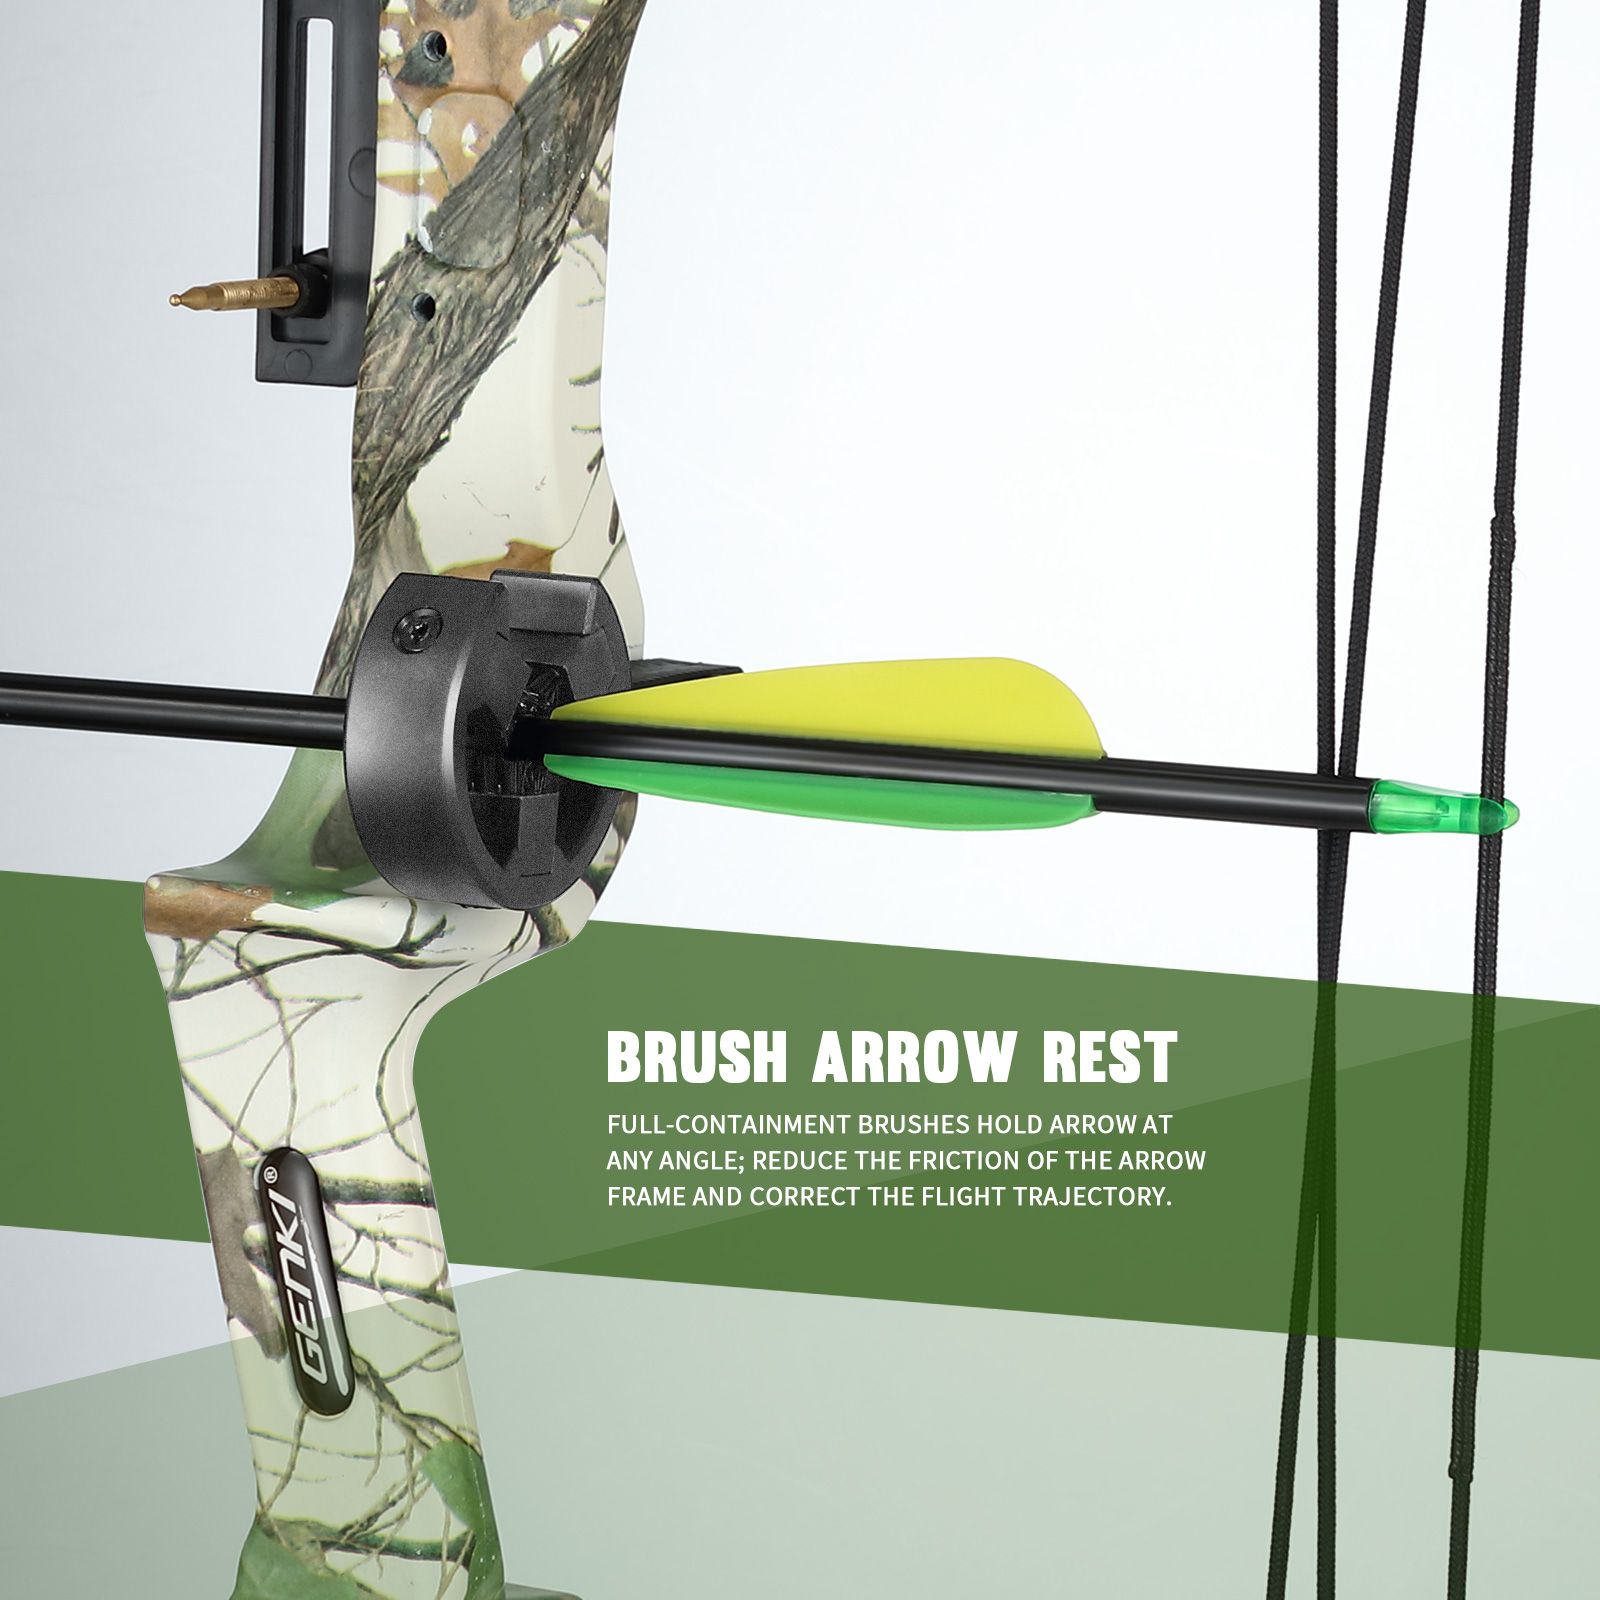 Compound Bow Arrow Set 15-20lbs Archery Sports Hunting Target Shooting RH Adjustable Speed for Youth Beginner Practice Camo